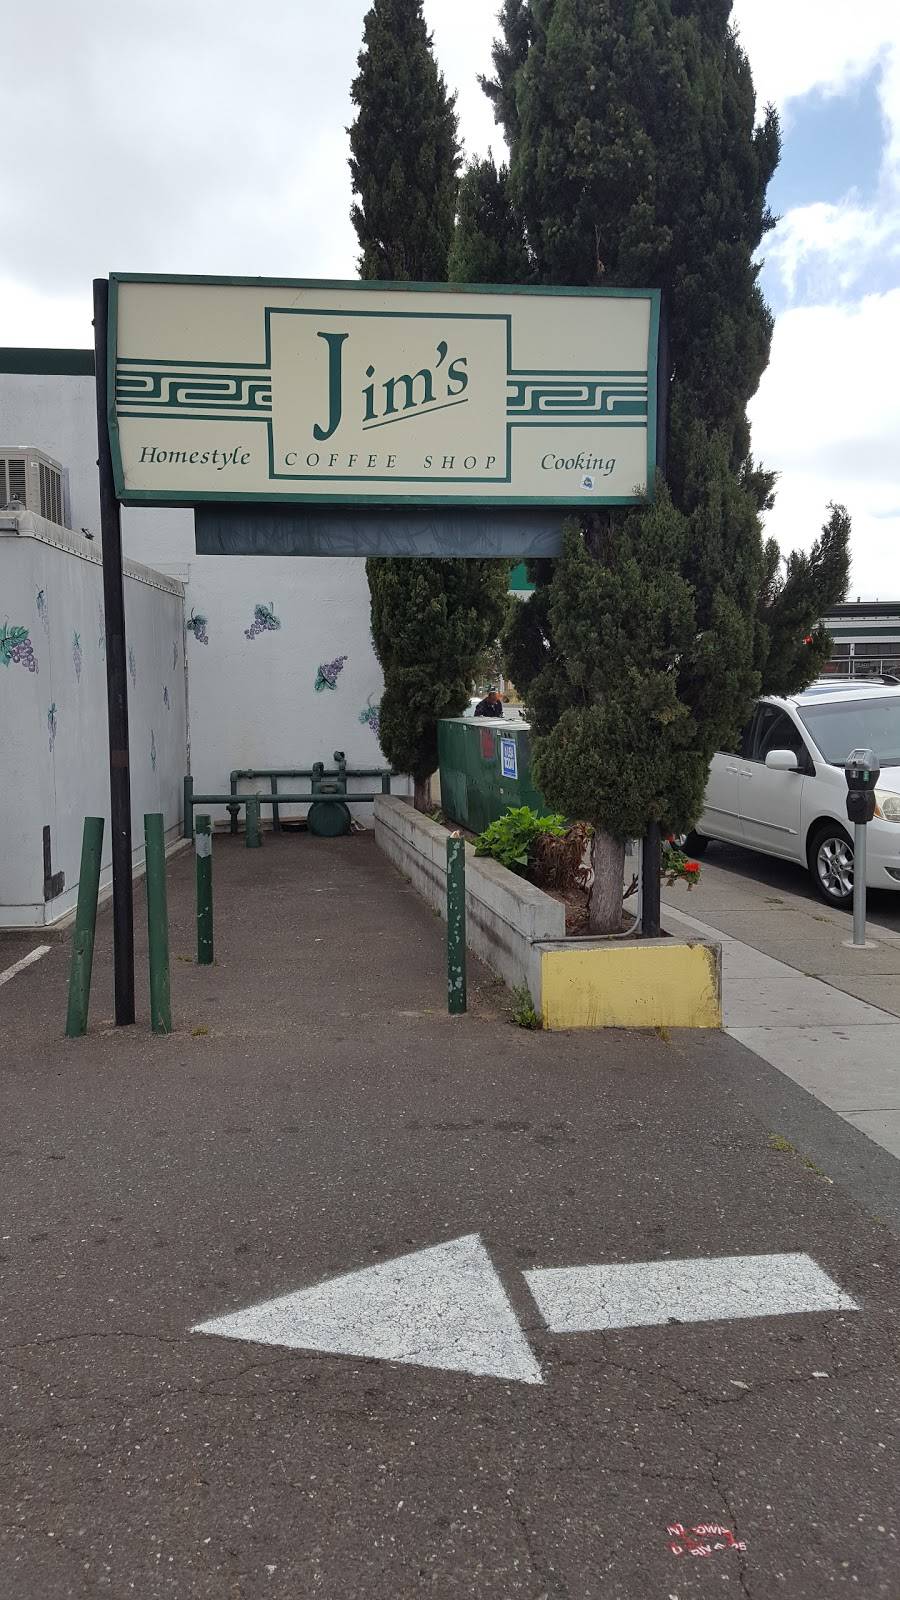 Jims Coffee Shop | cafe | 2333 Lincoln Ave, Alameda, CA 94501, USA | 5105235368 OR +1 510-523-5368